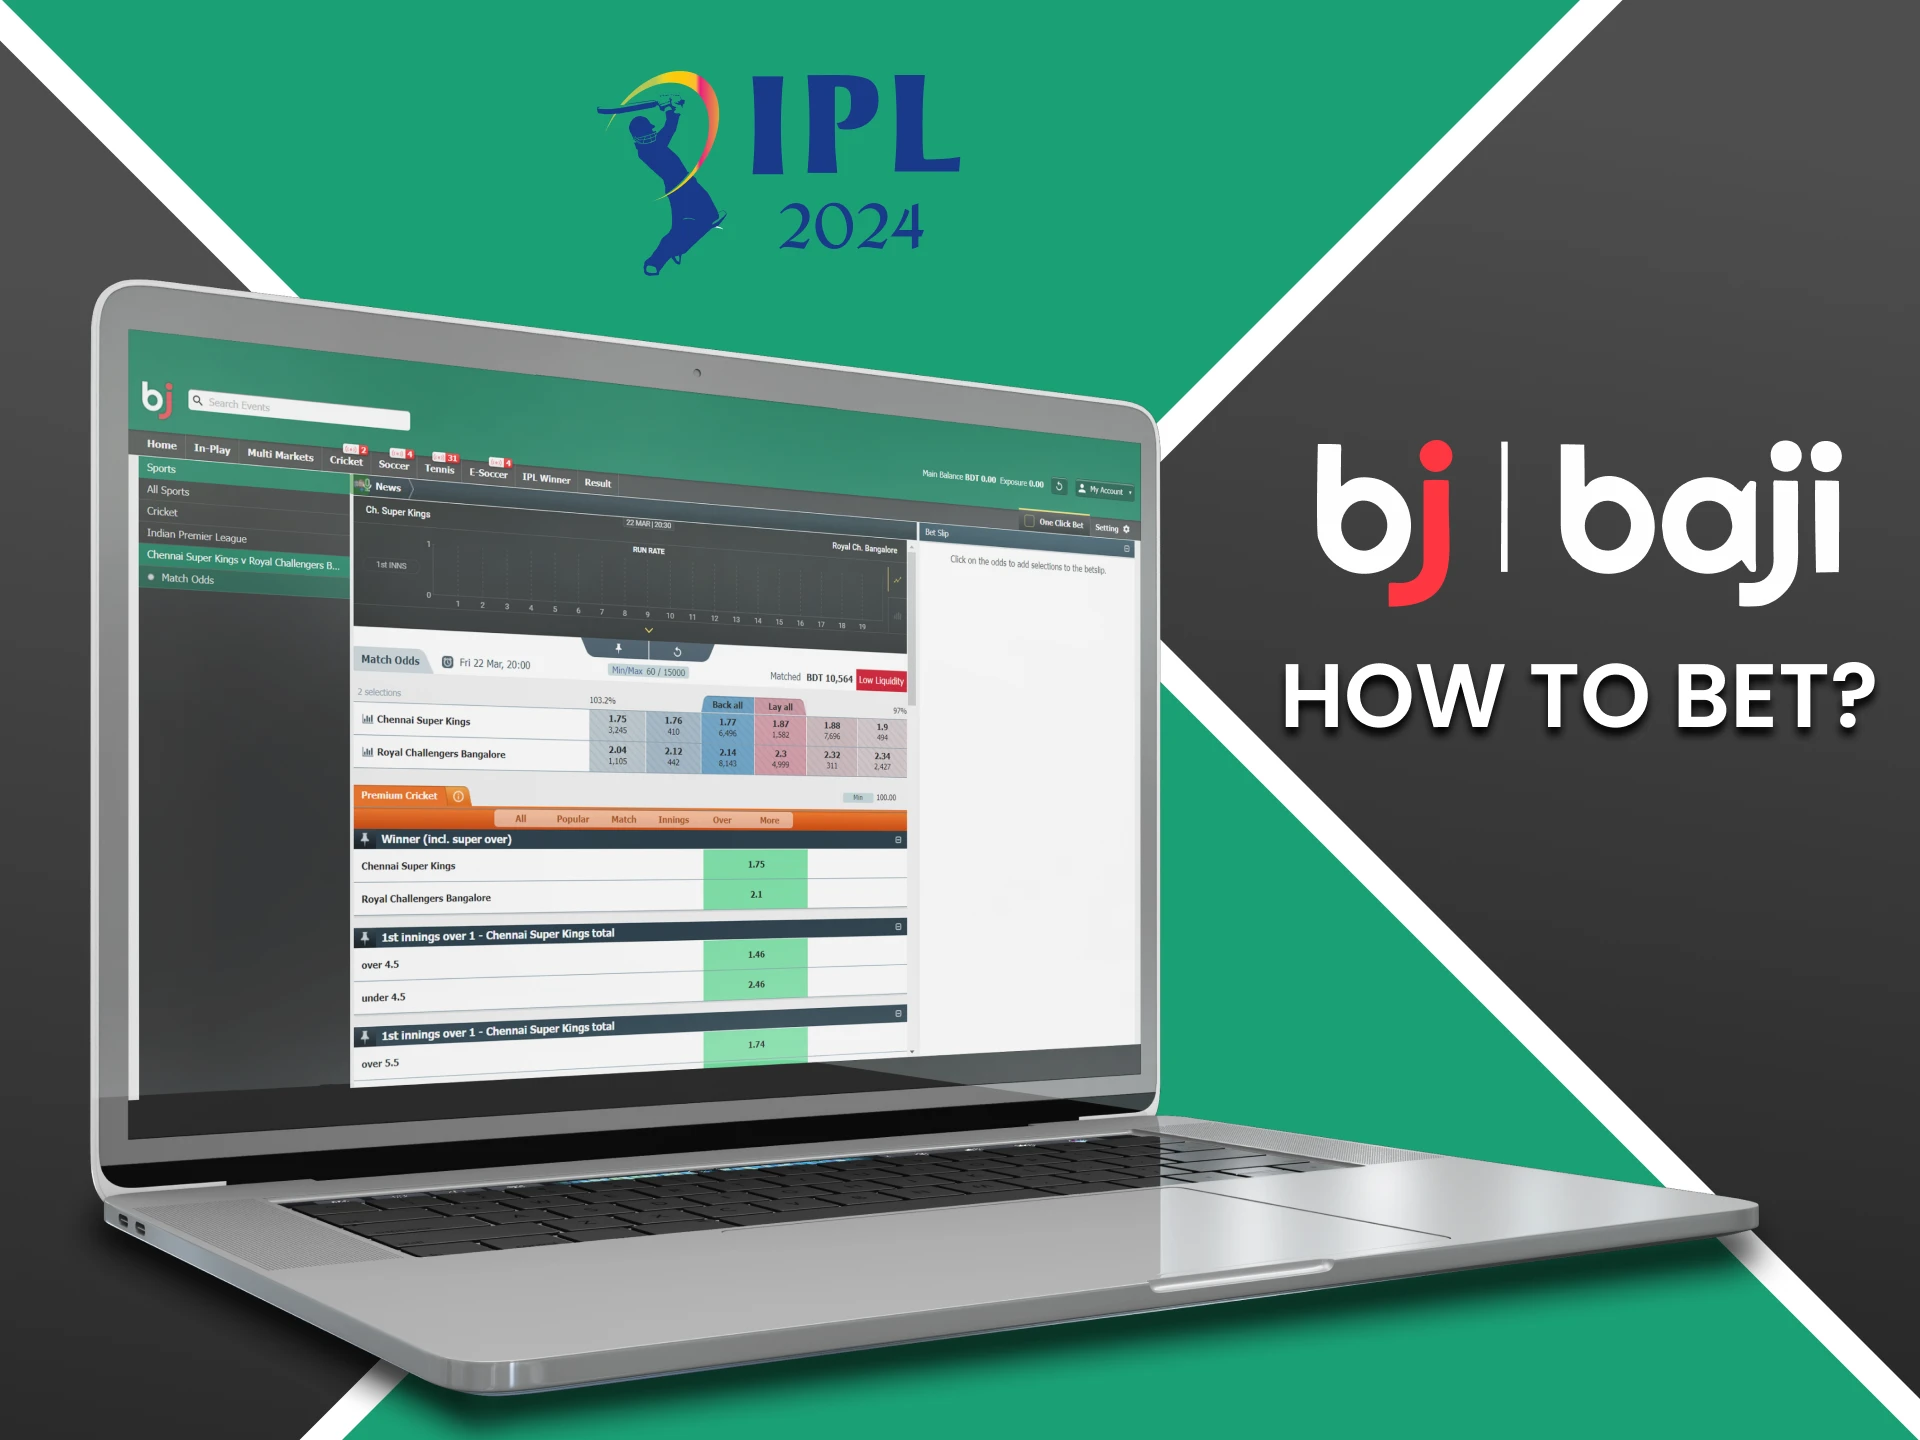 We will tell you how to bet in the IPL league on Baji.